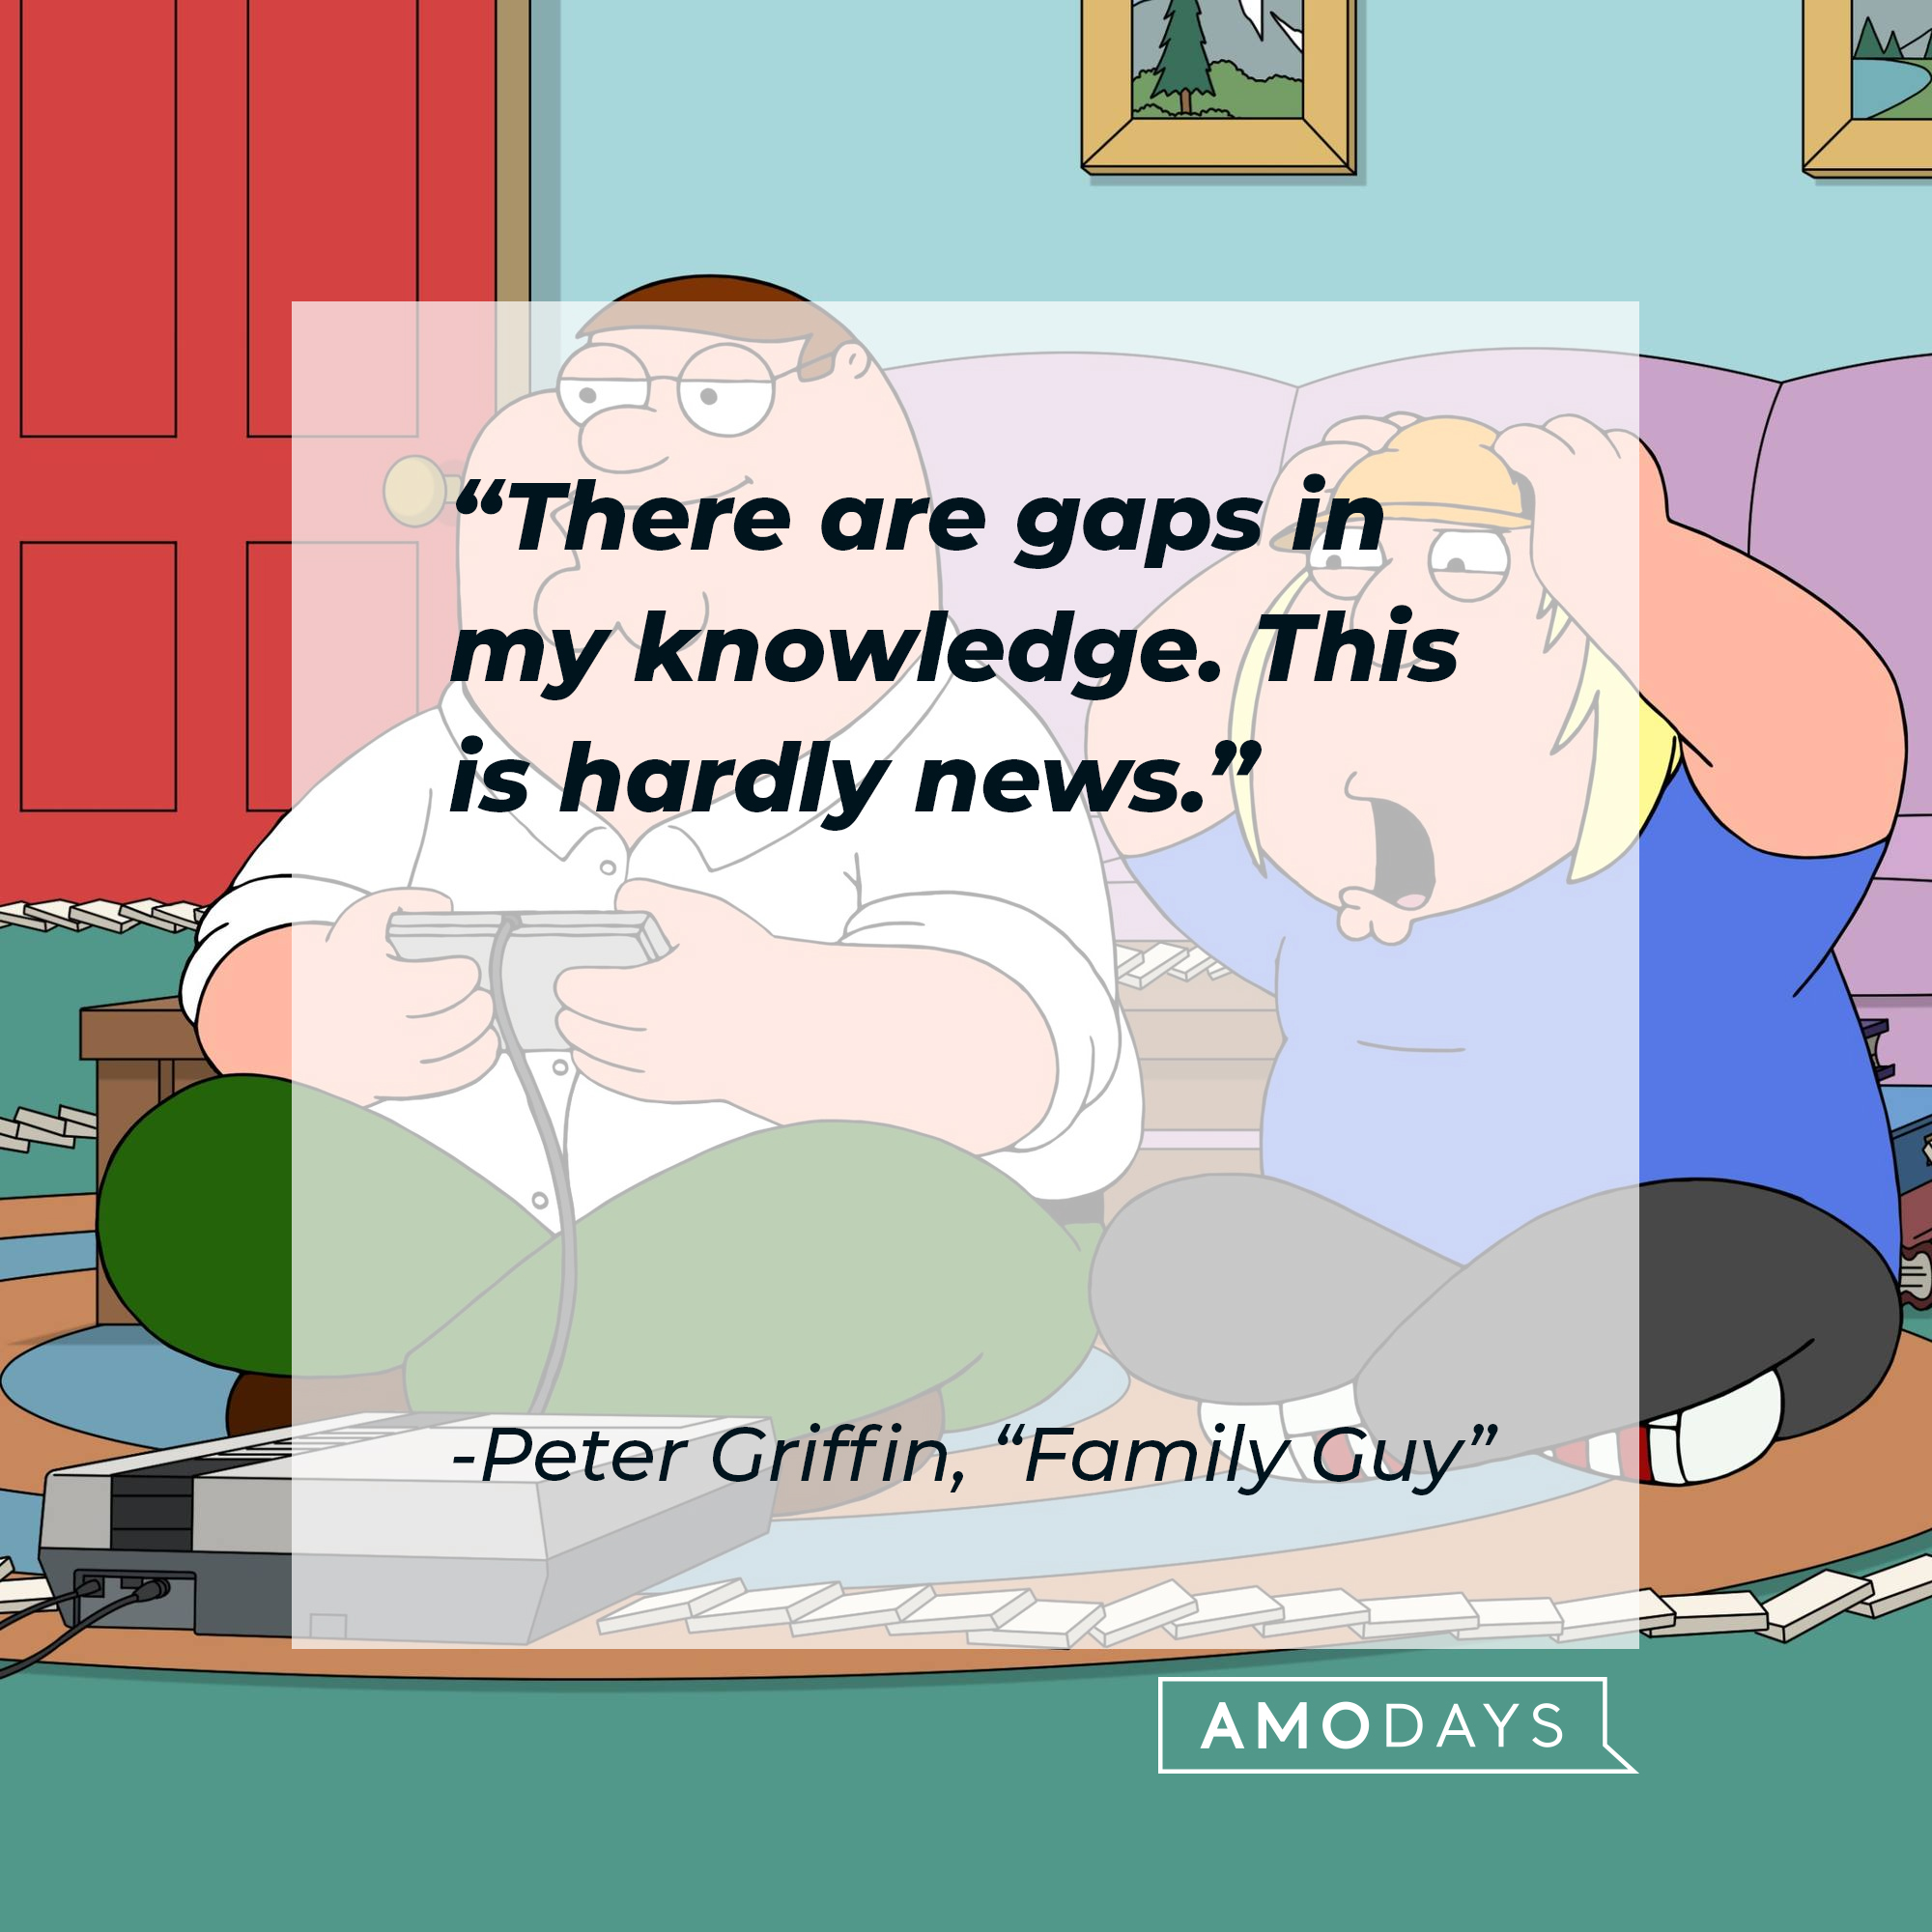 Peter Griffin's quote: "There are gaps in my knowledge. This is hardly news." | Source: facebook.com/FamilyGuy